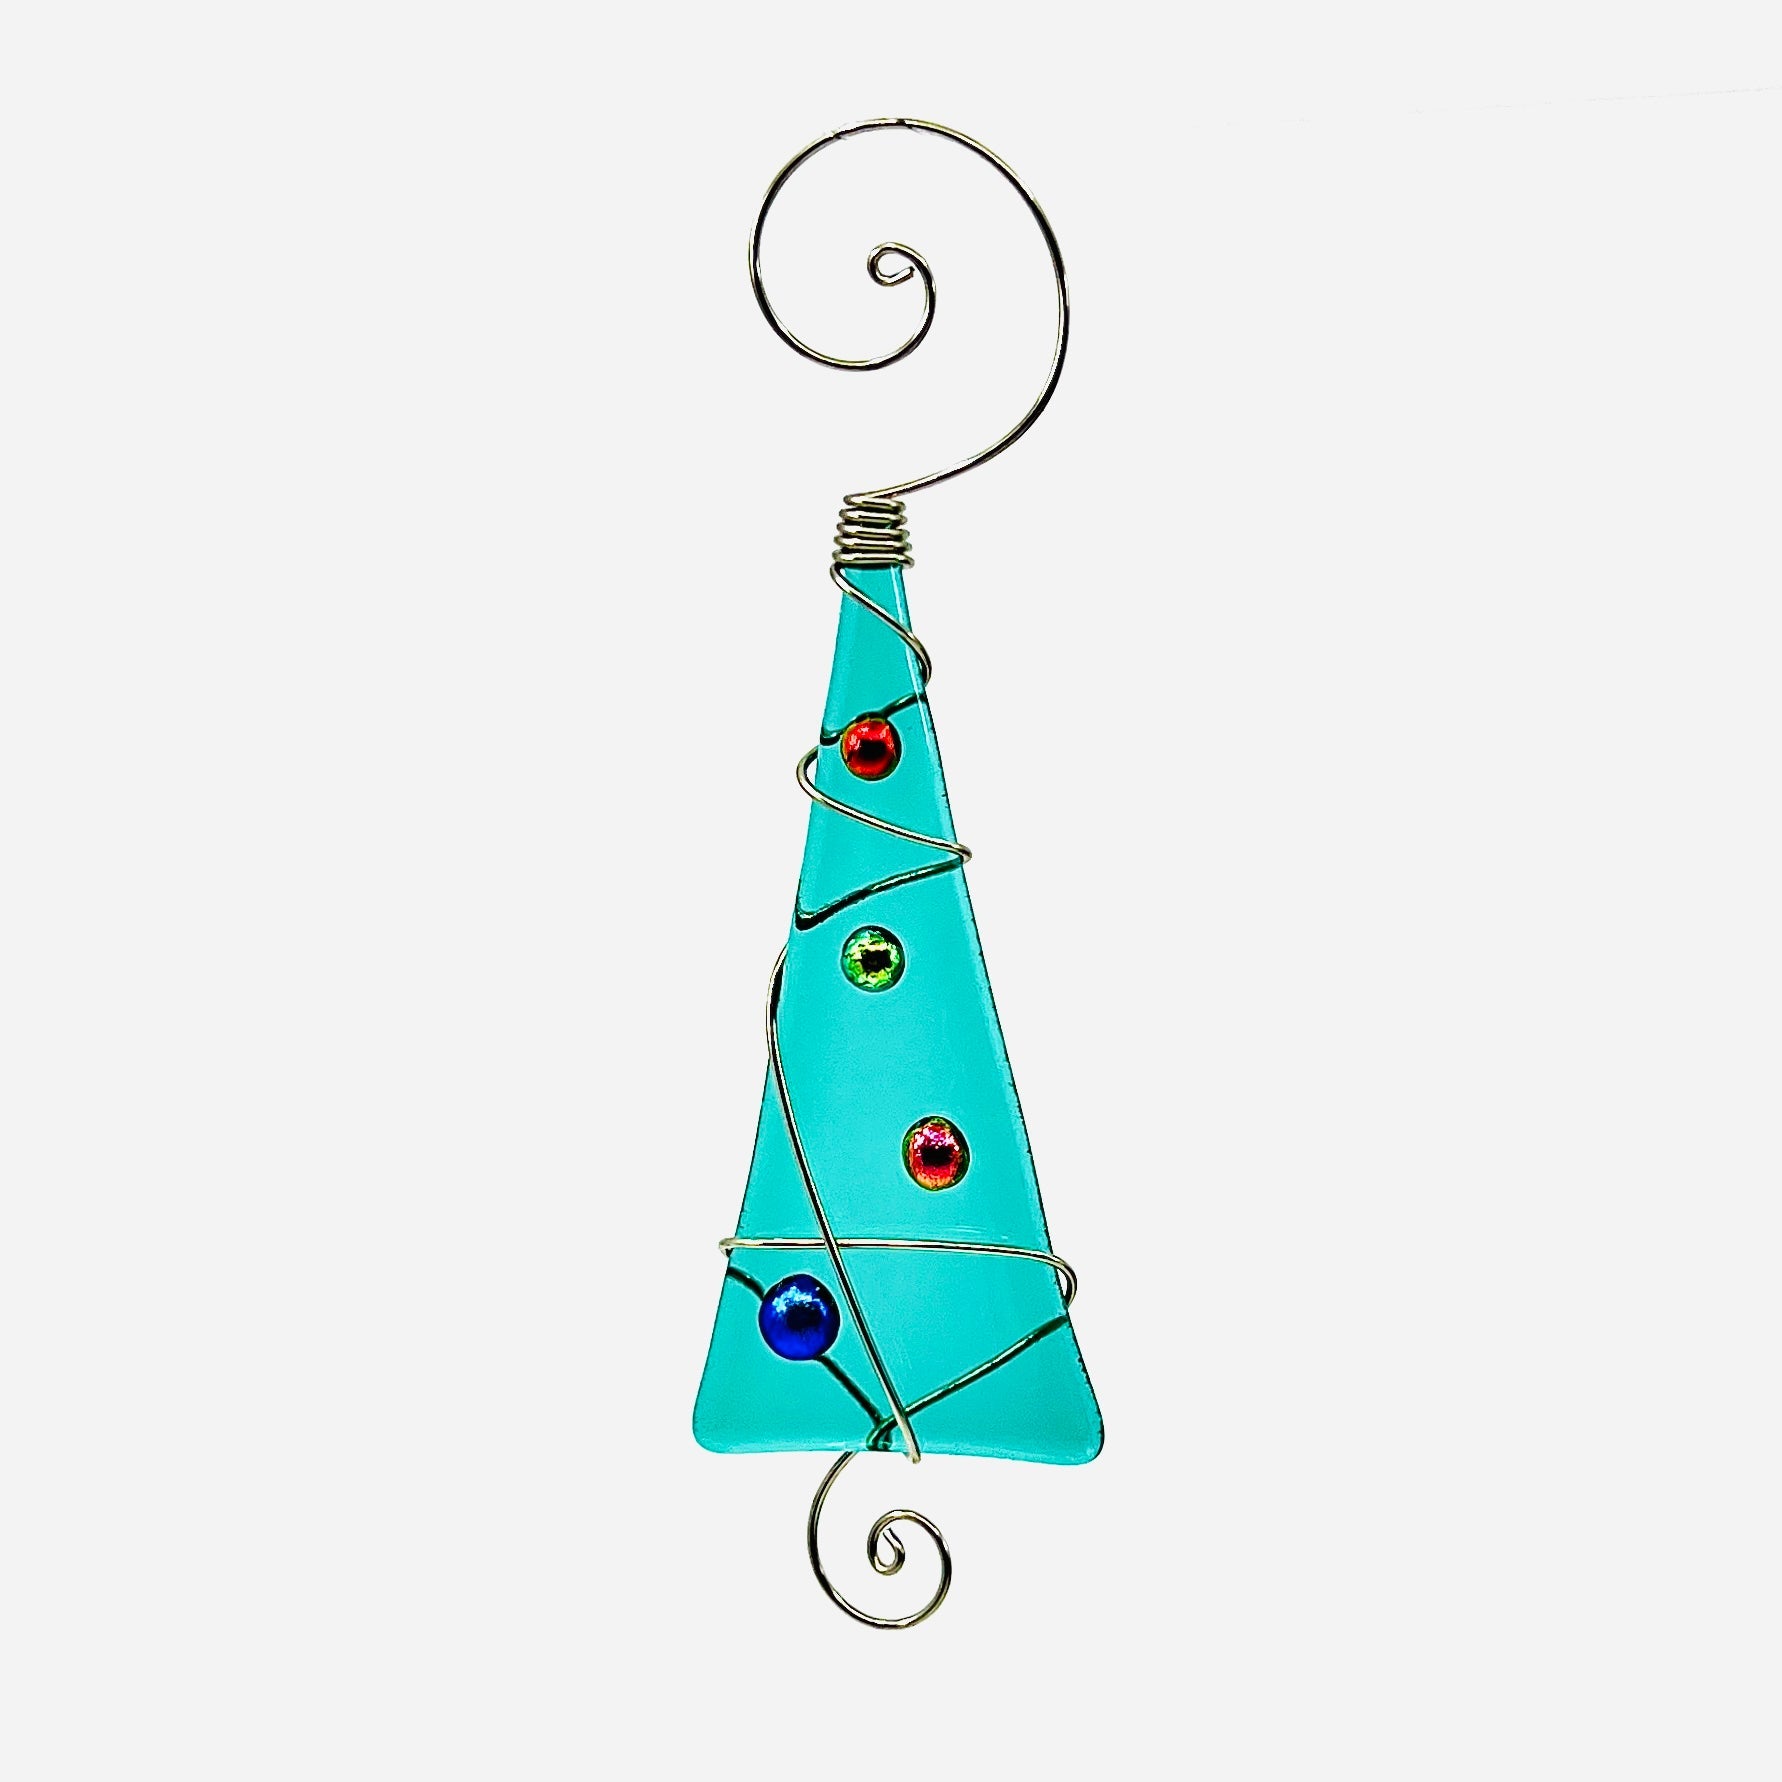 Whimsical Fused Glass Tree Ornament Haywire Art 